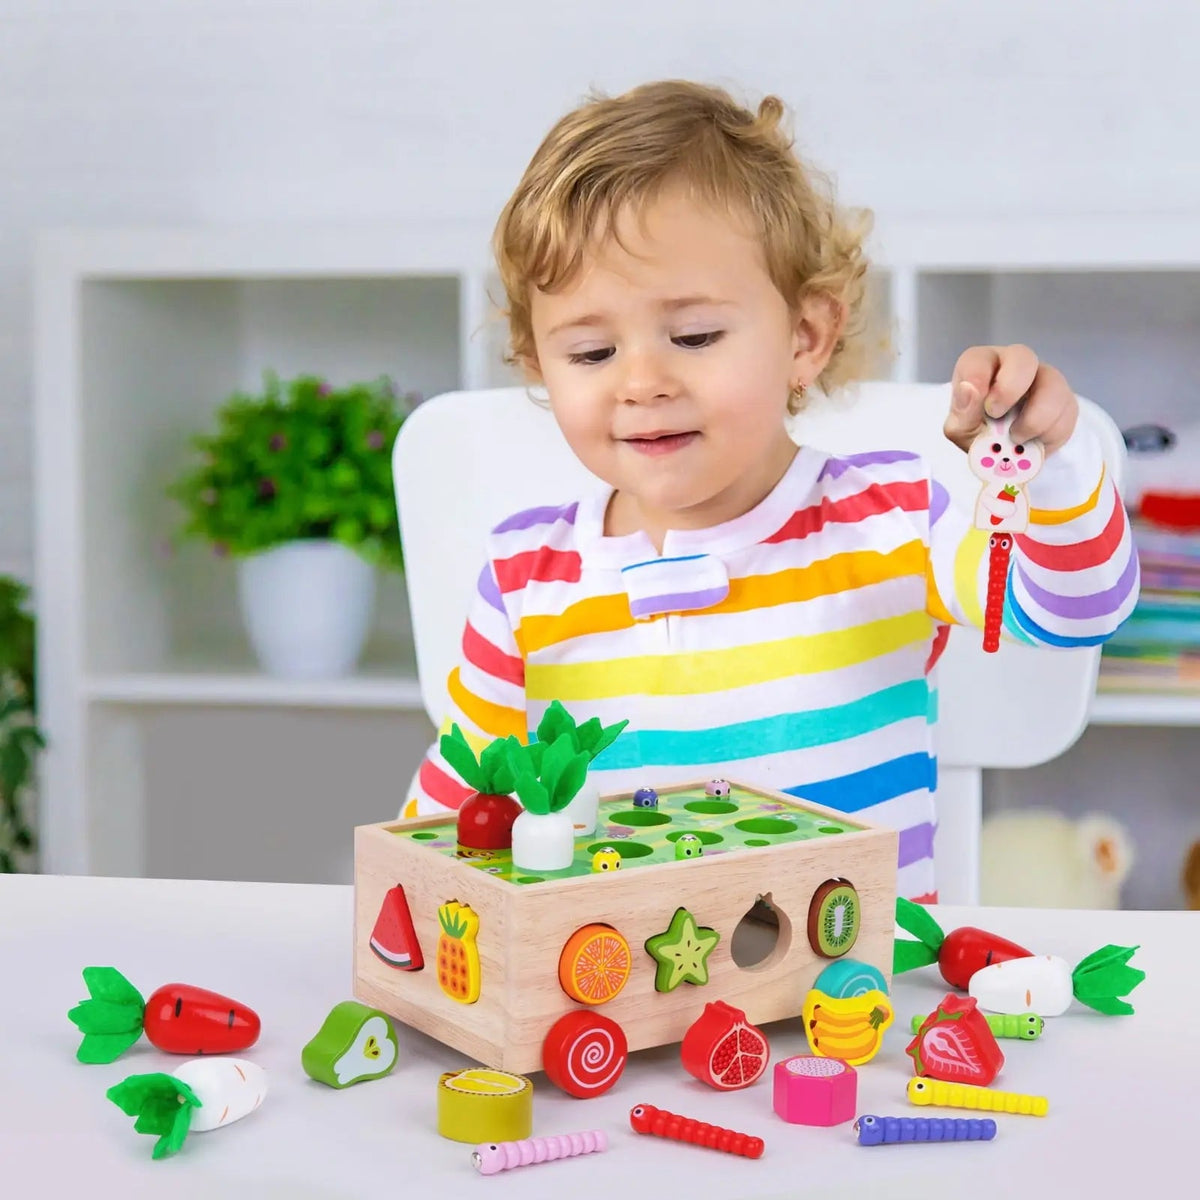 Toddlers Montessori Wooden Educational Toys for Baby Boys Girls On Wooden